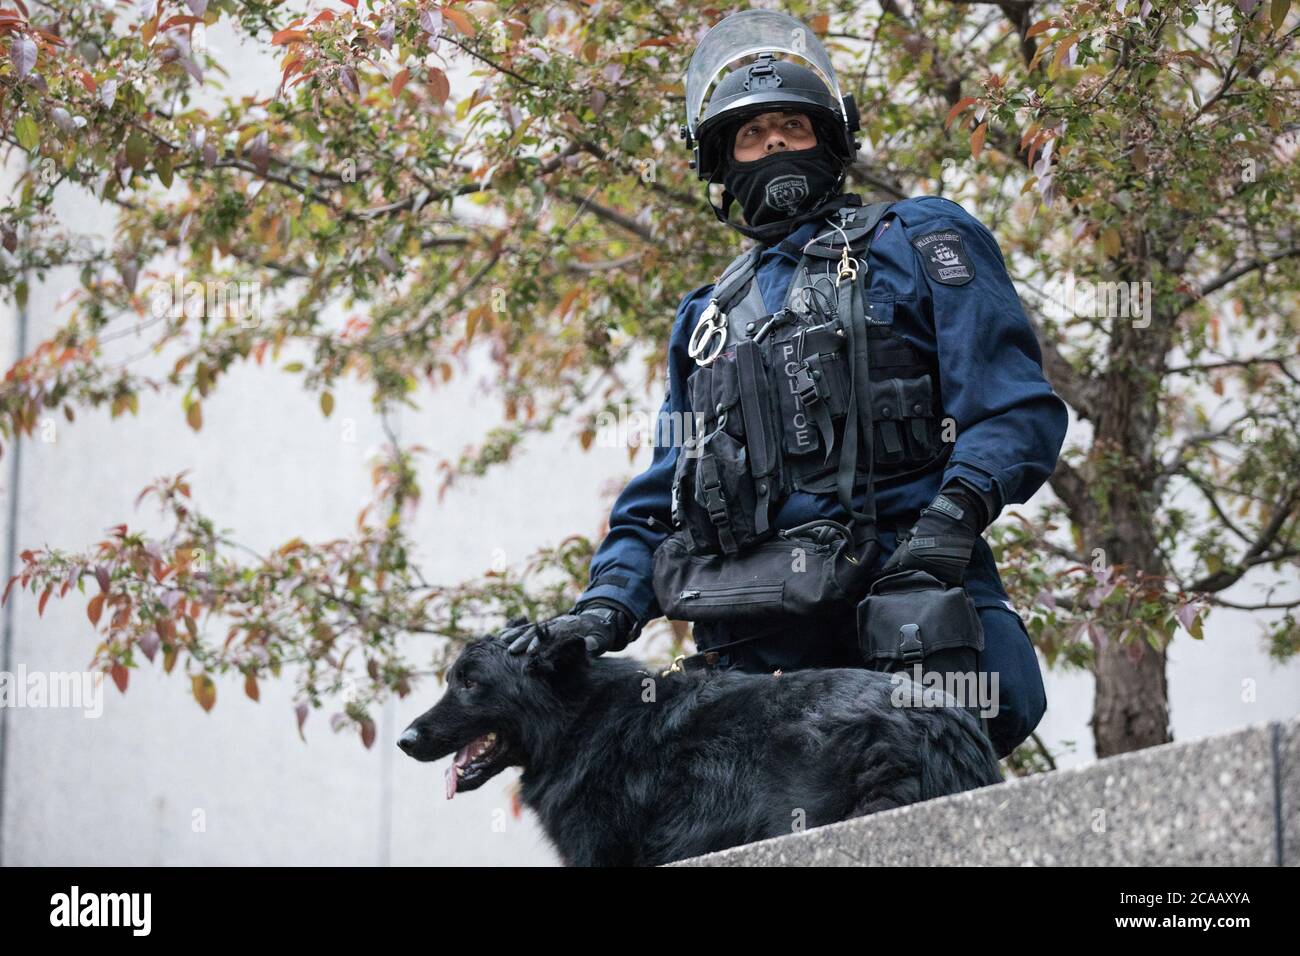 Police officer with k9 dog. Stock Photo